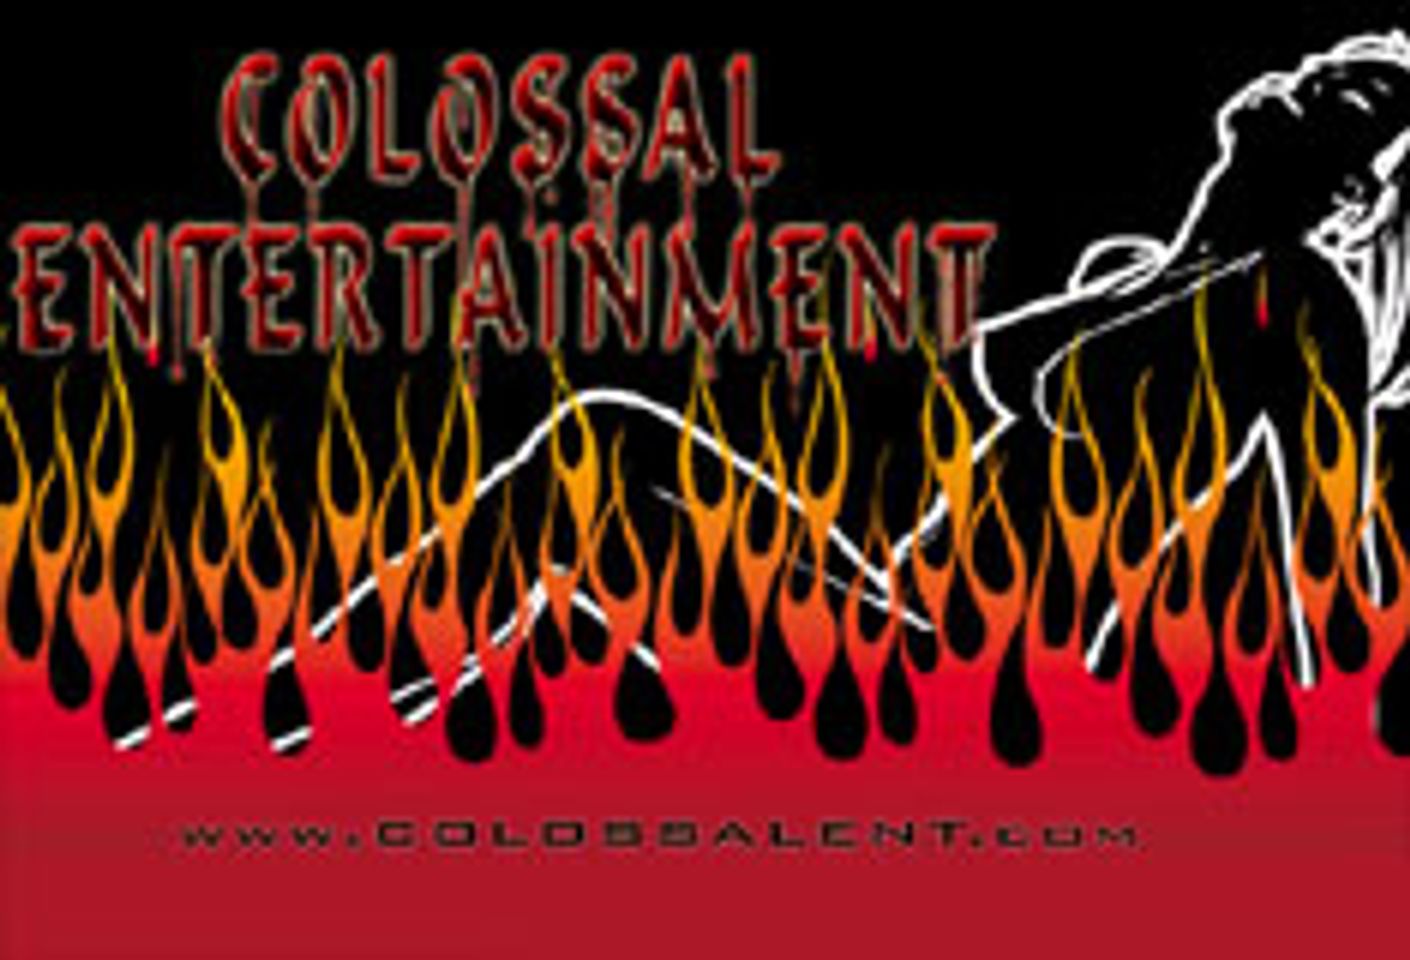 Colossal Launches Online Store